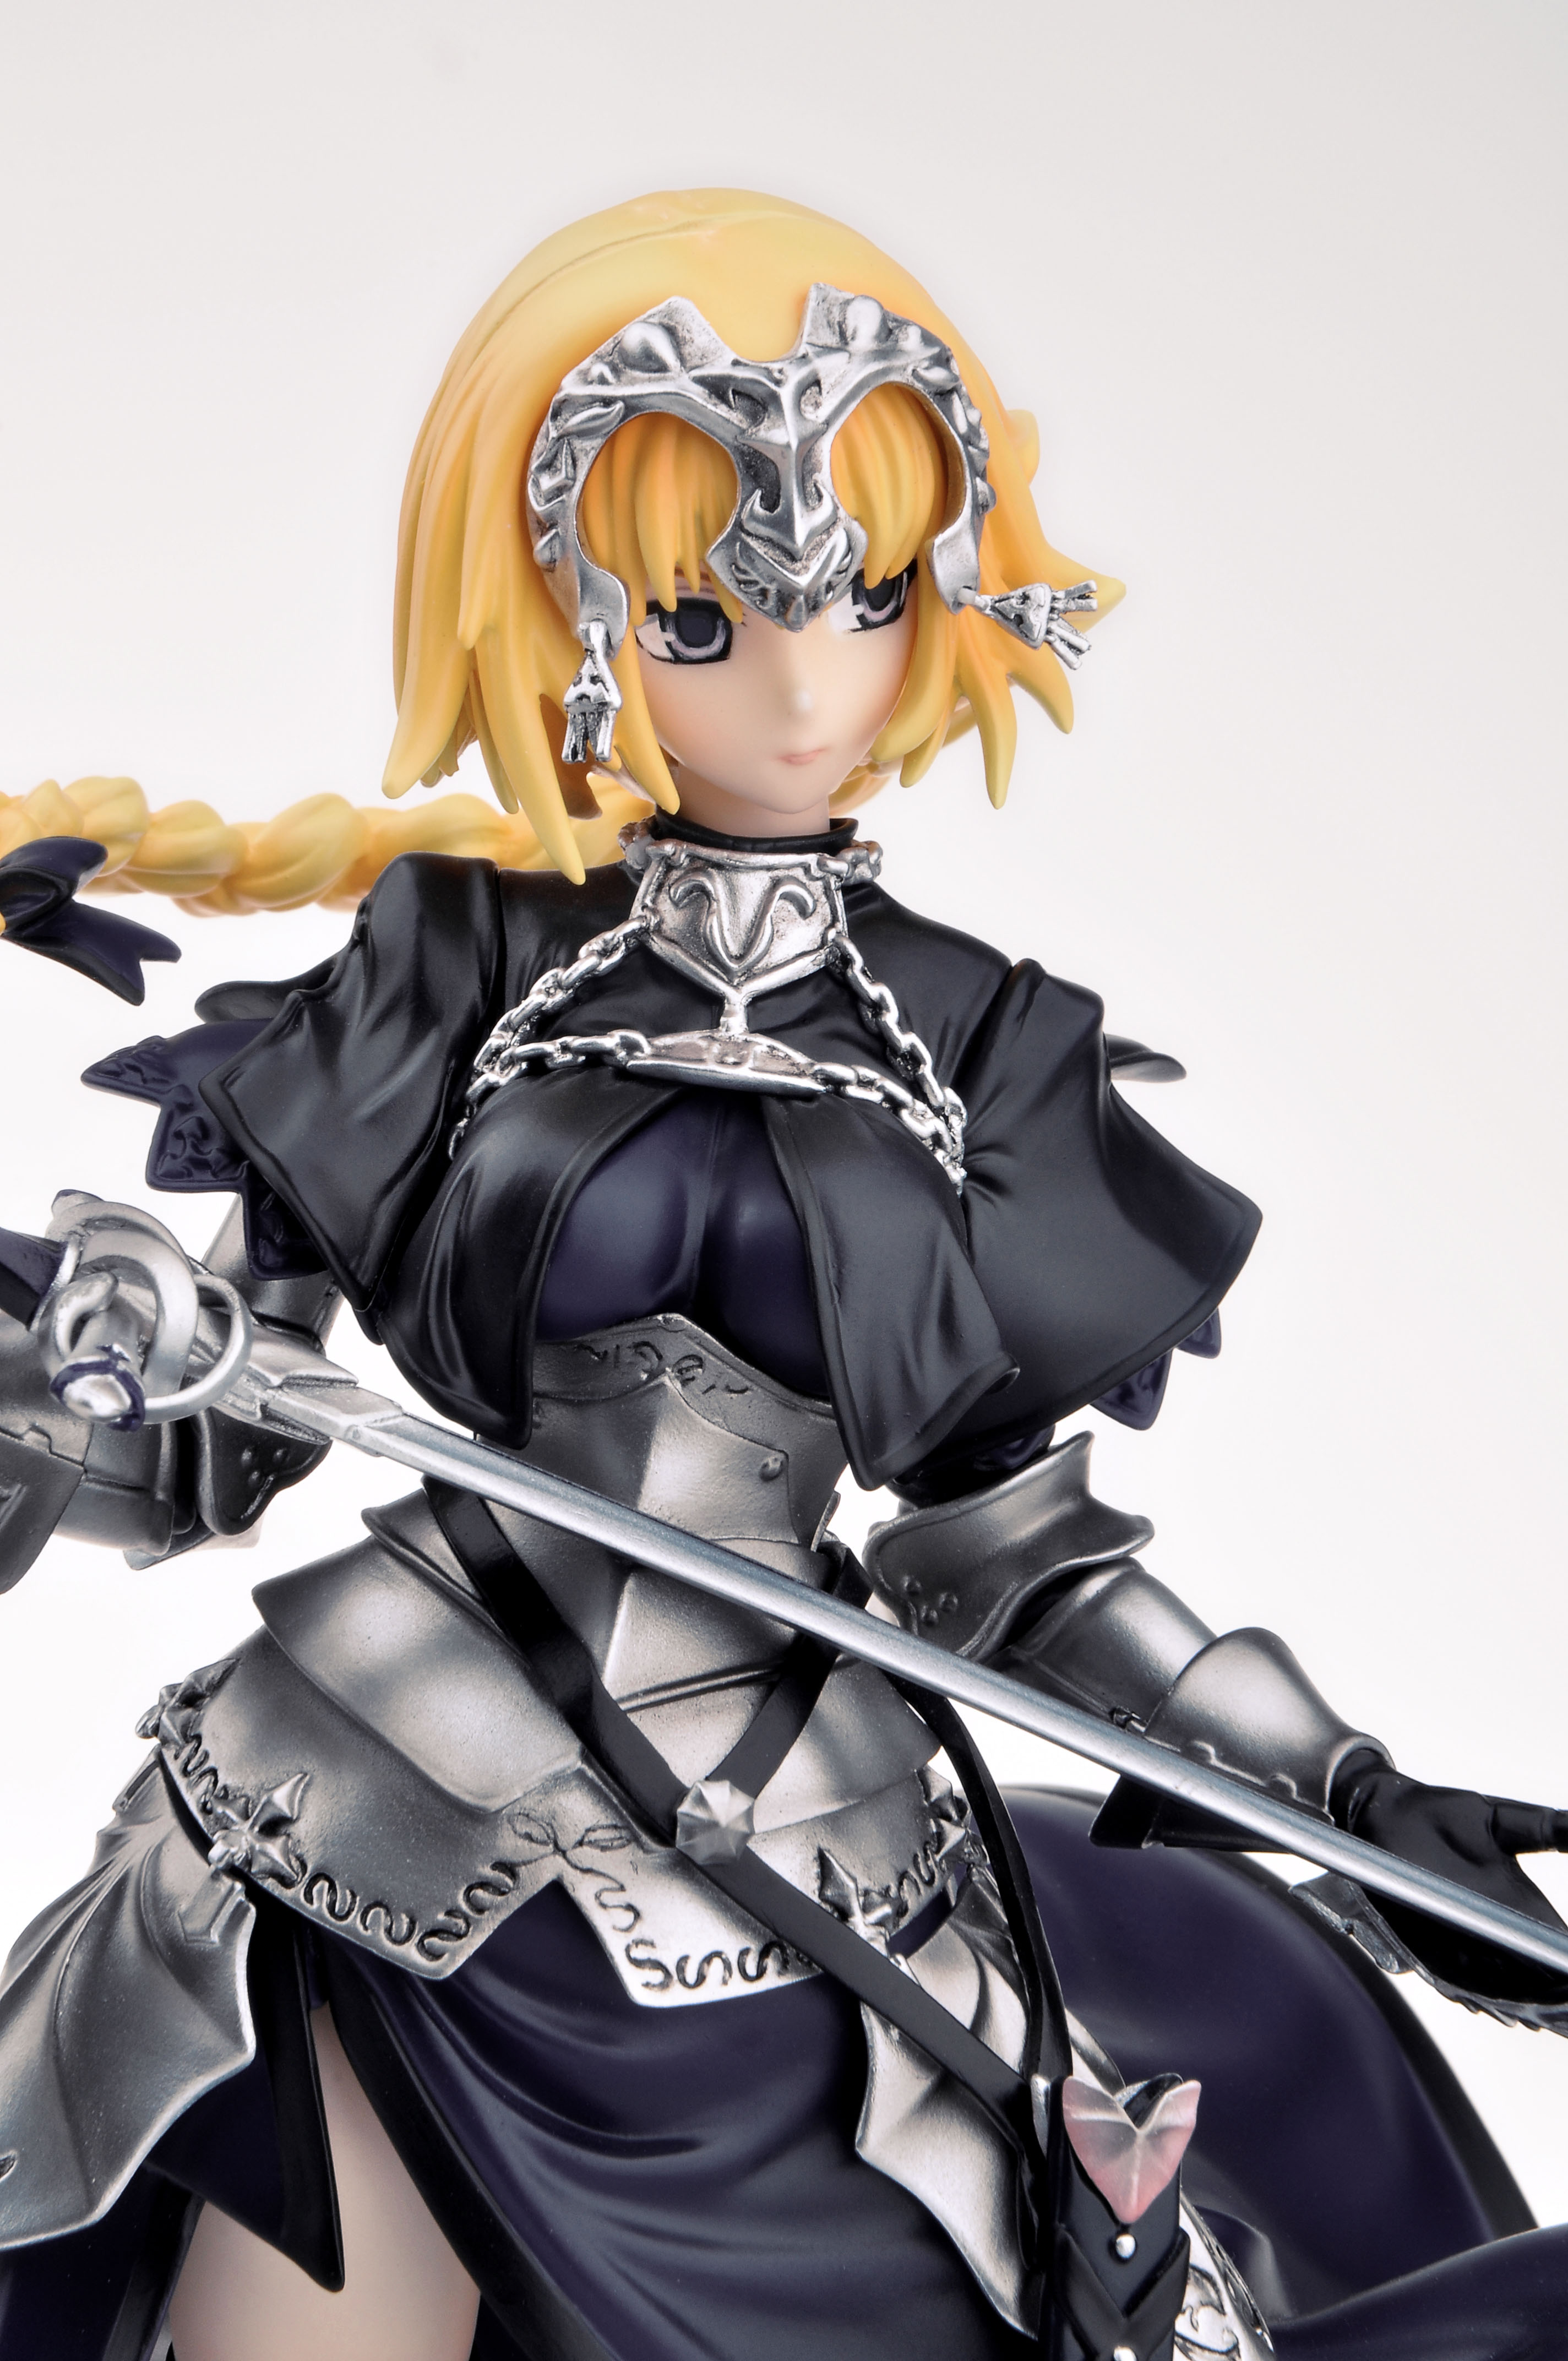 Fate/Apocrypha's Ruler Joins E2046's Gathering Collection - Haruhichan